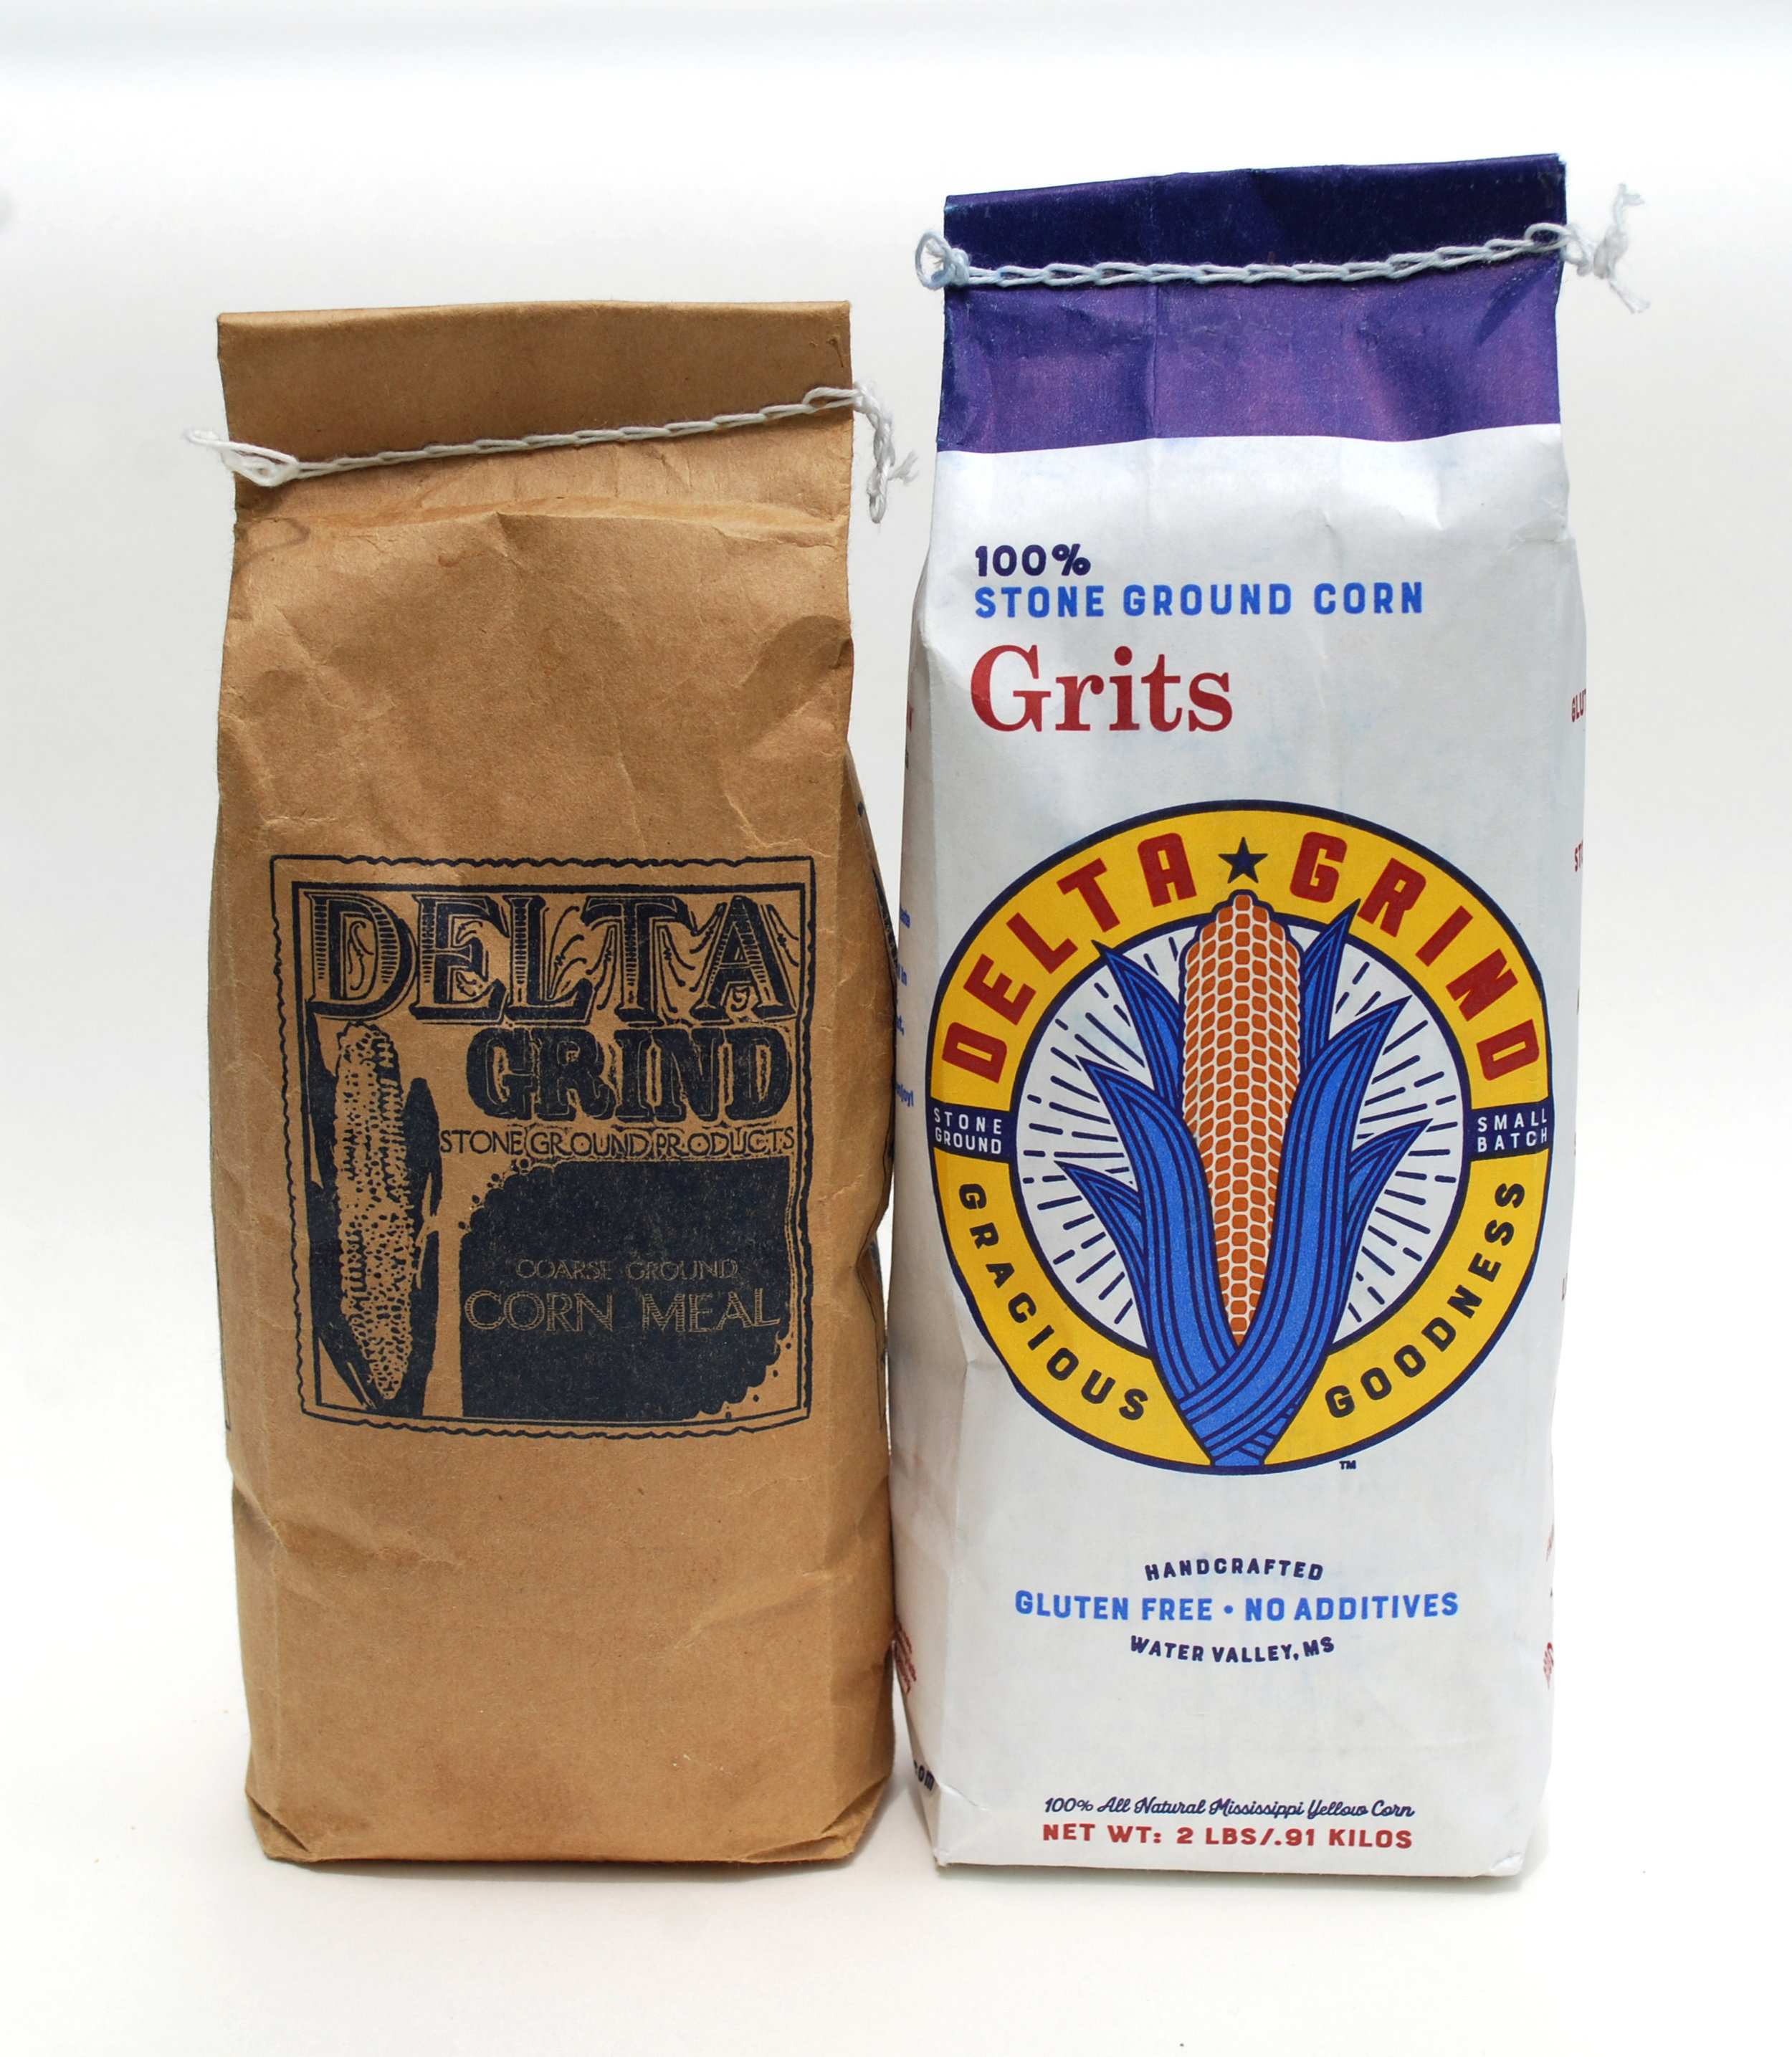  Before &amp; After Delta Grind packaging  Creative and design by Chuck Mitchell  for Delta Grind Stone Ground Products, LLC 